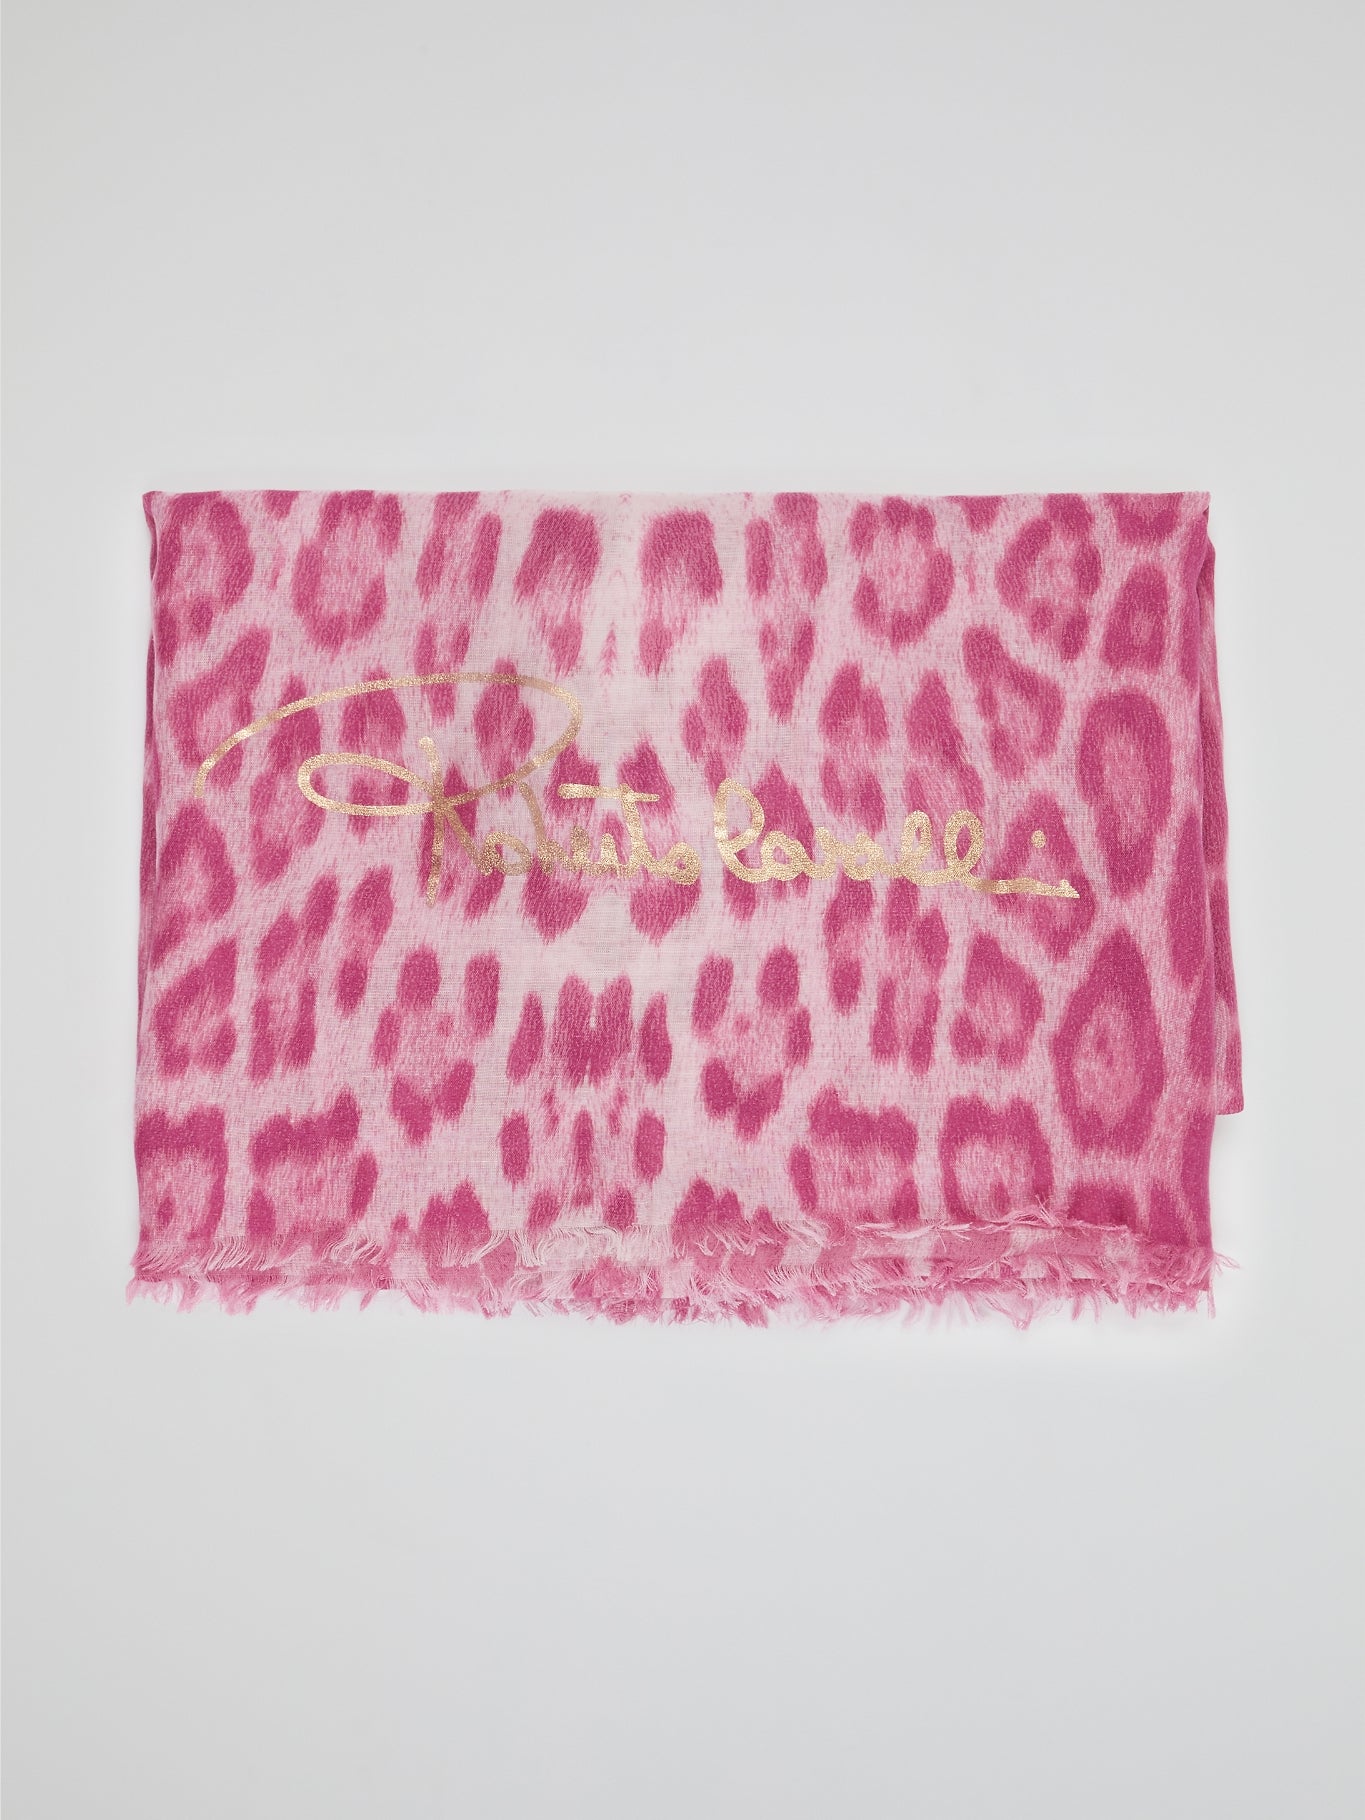 Wrap yourself in the wild elegance of this Pink Animal Print Scarf by Roberto Cavalli. The luxurious blend of soft fabric showcases a mesmerizing array of rosy hues, adorned with a fierce and playful animal motif. With each drape, let this statement accessory unleash your inner fashion safari, captivating attention wherever you go.